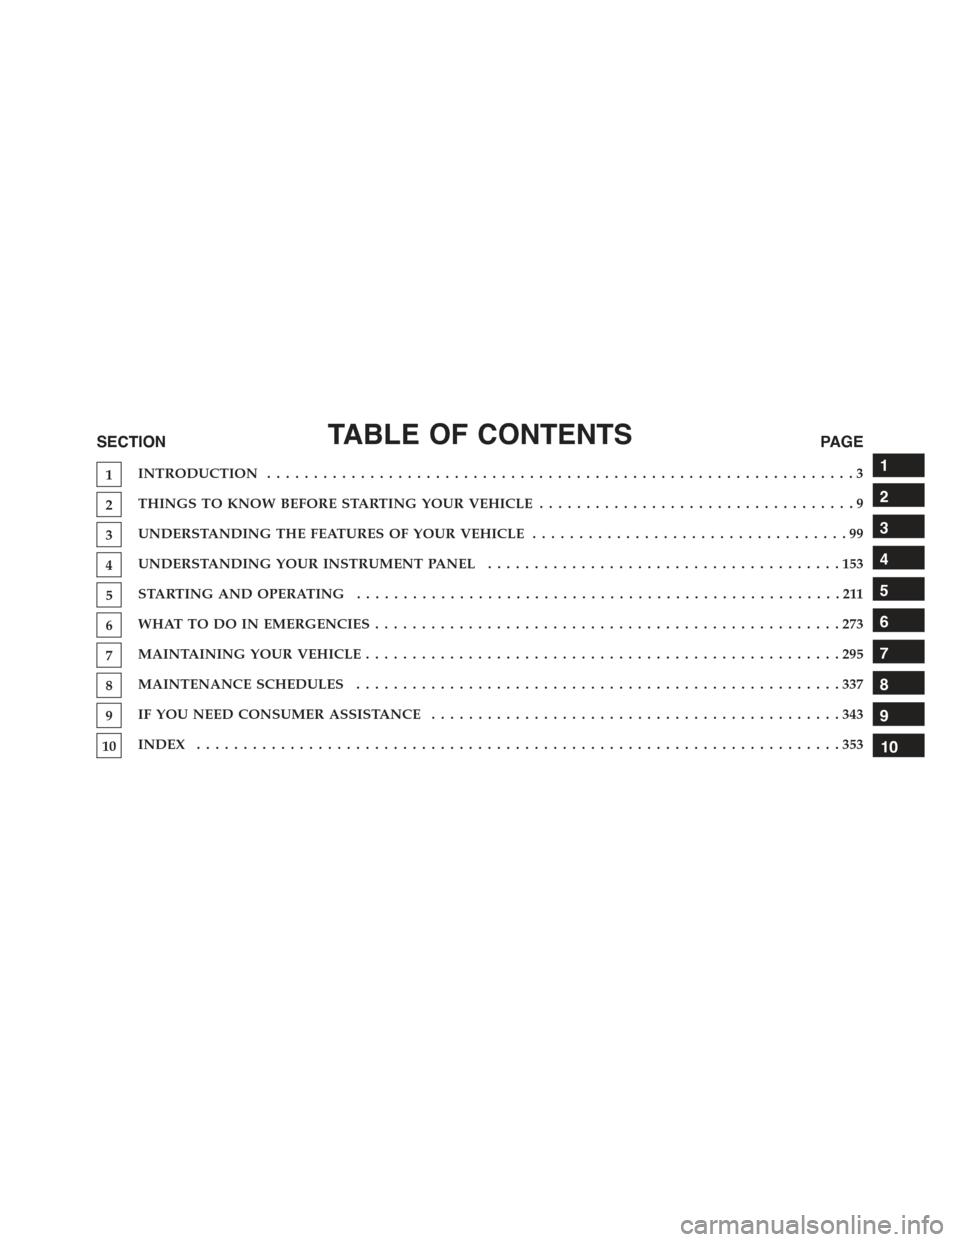 FIAT 500E 2015 2.G Owners Manual TABLE OF CONTENTSSECTIONPAGE
1INTRODUCTION ...............................................................3
2THINGS TO KNOW BEFORE STARTING YOUR VEHICLE..................................9
3UNDERSTANDI